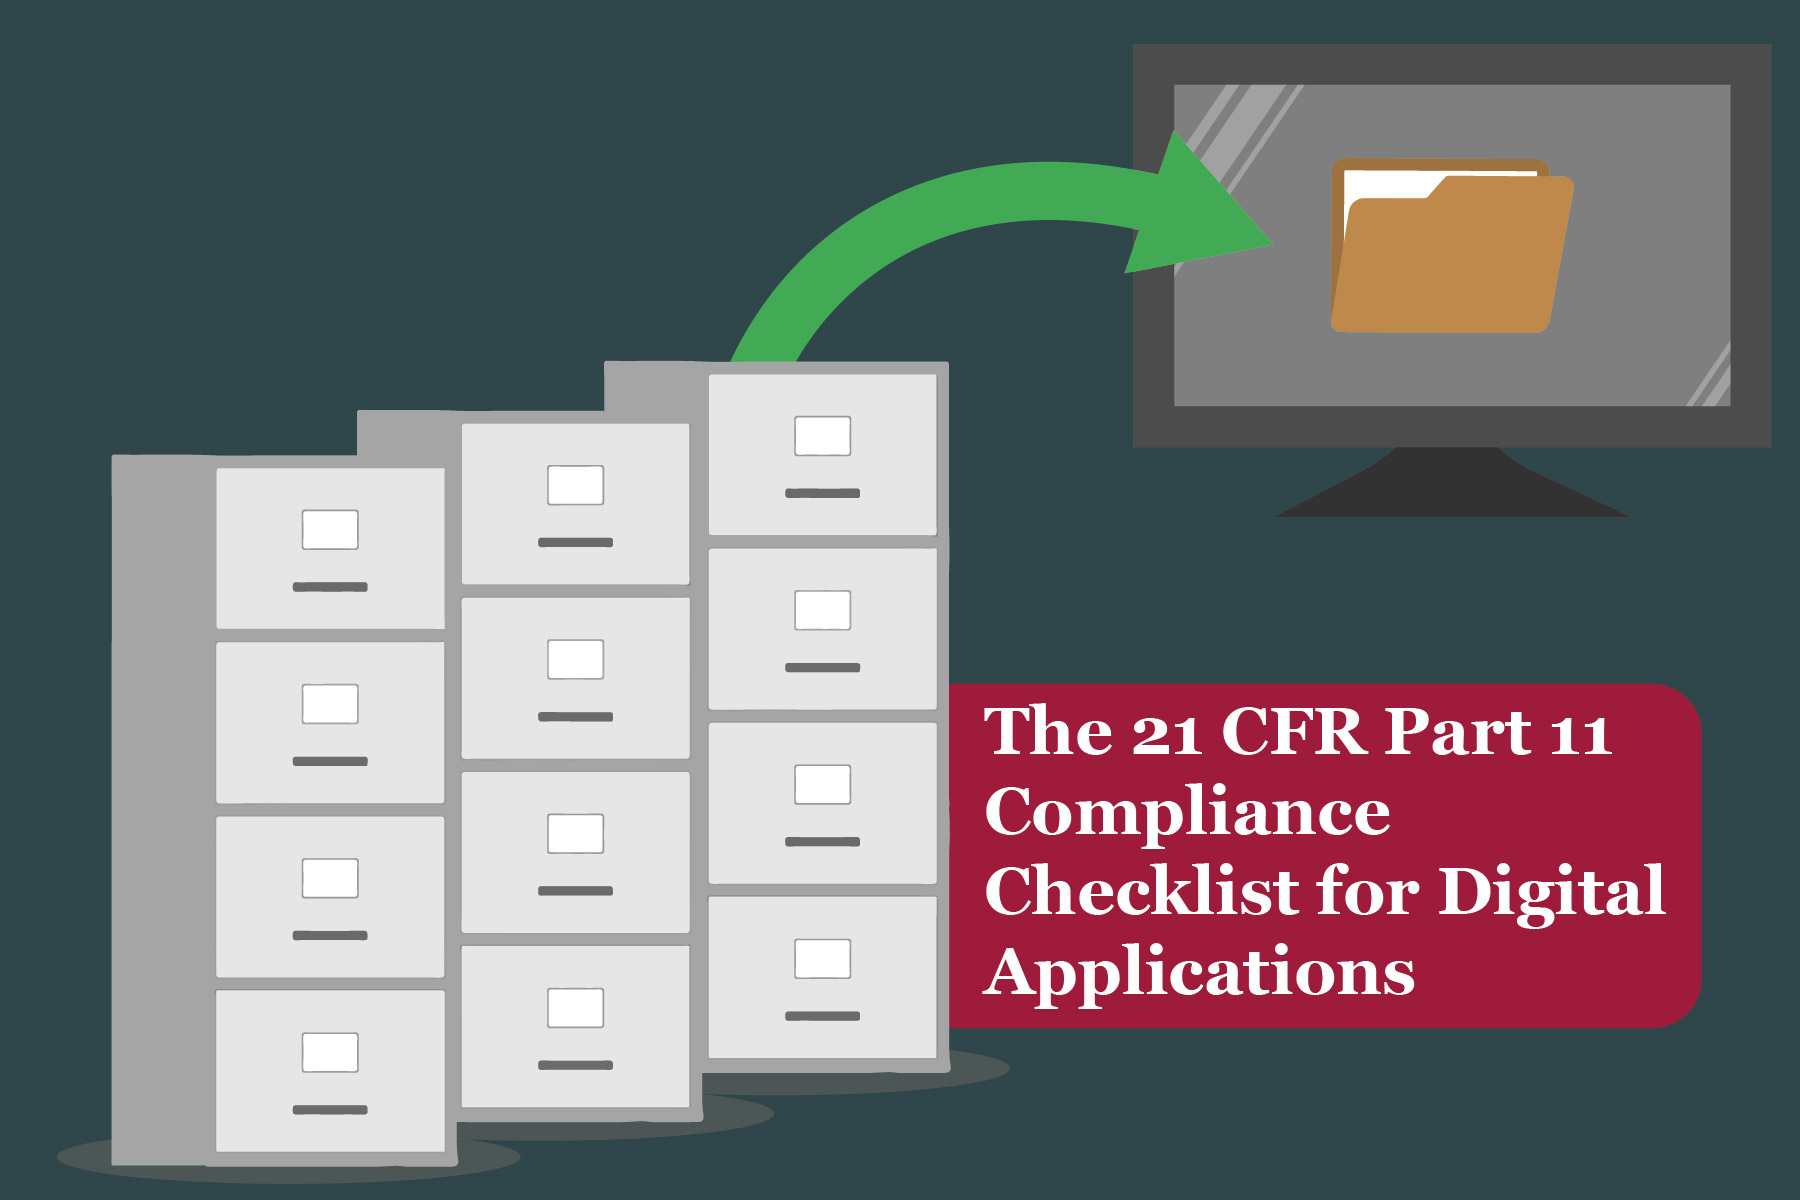 The 21 CFR Part 11 Compliance Checklist for Digital Applications